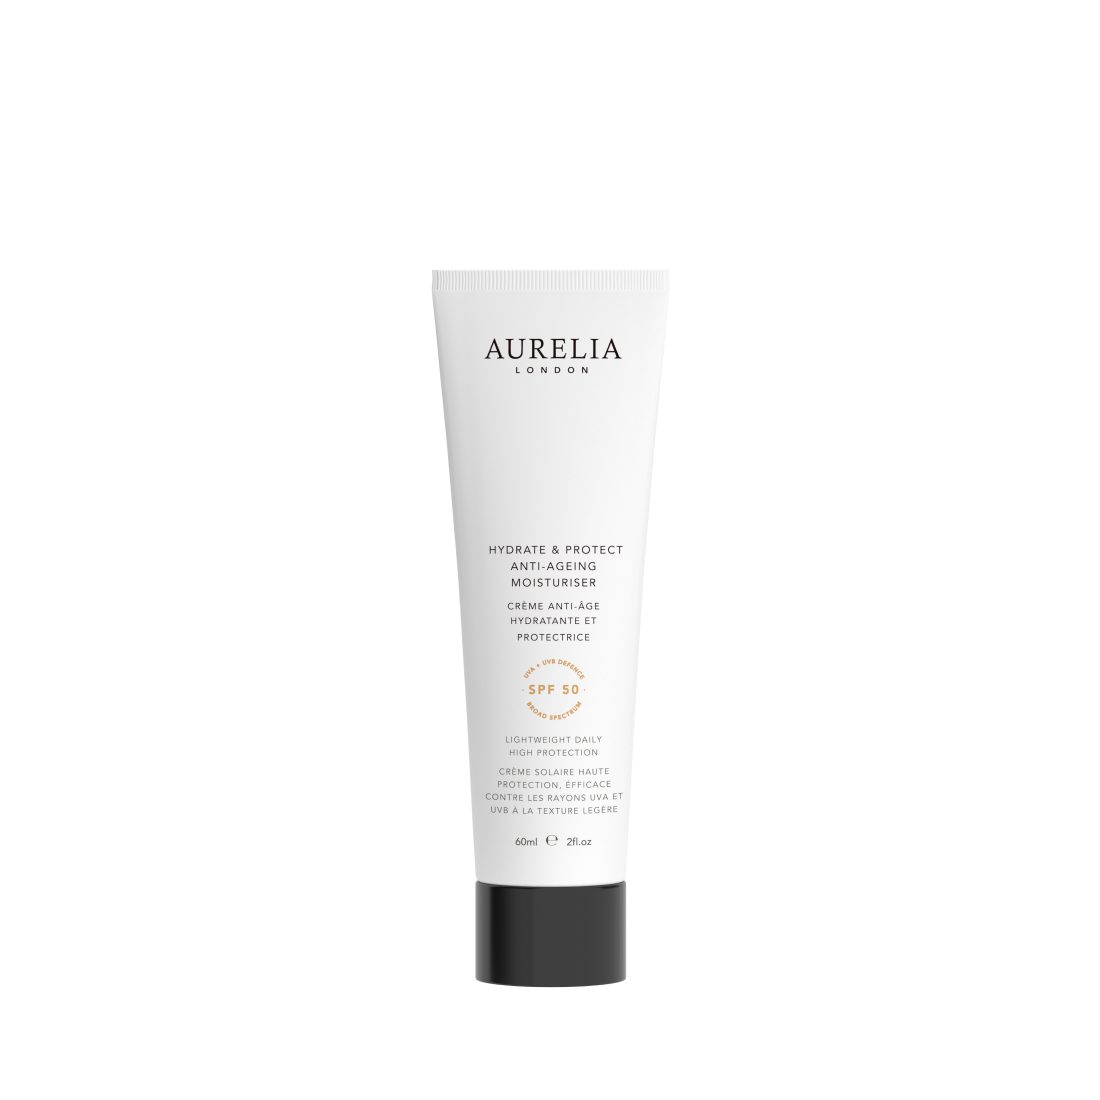 An image of Hydrate & Protect Anti-Ageing SPF50 Moisturiser